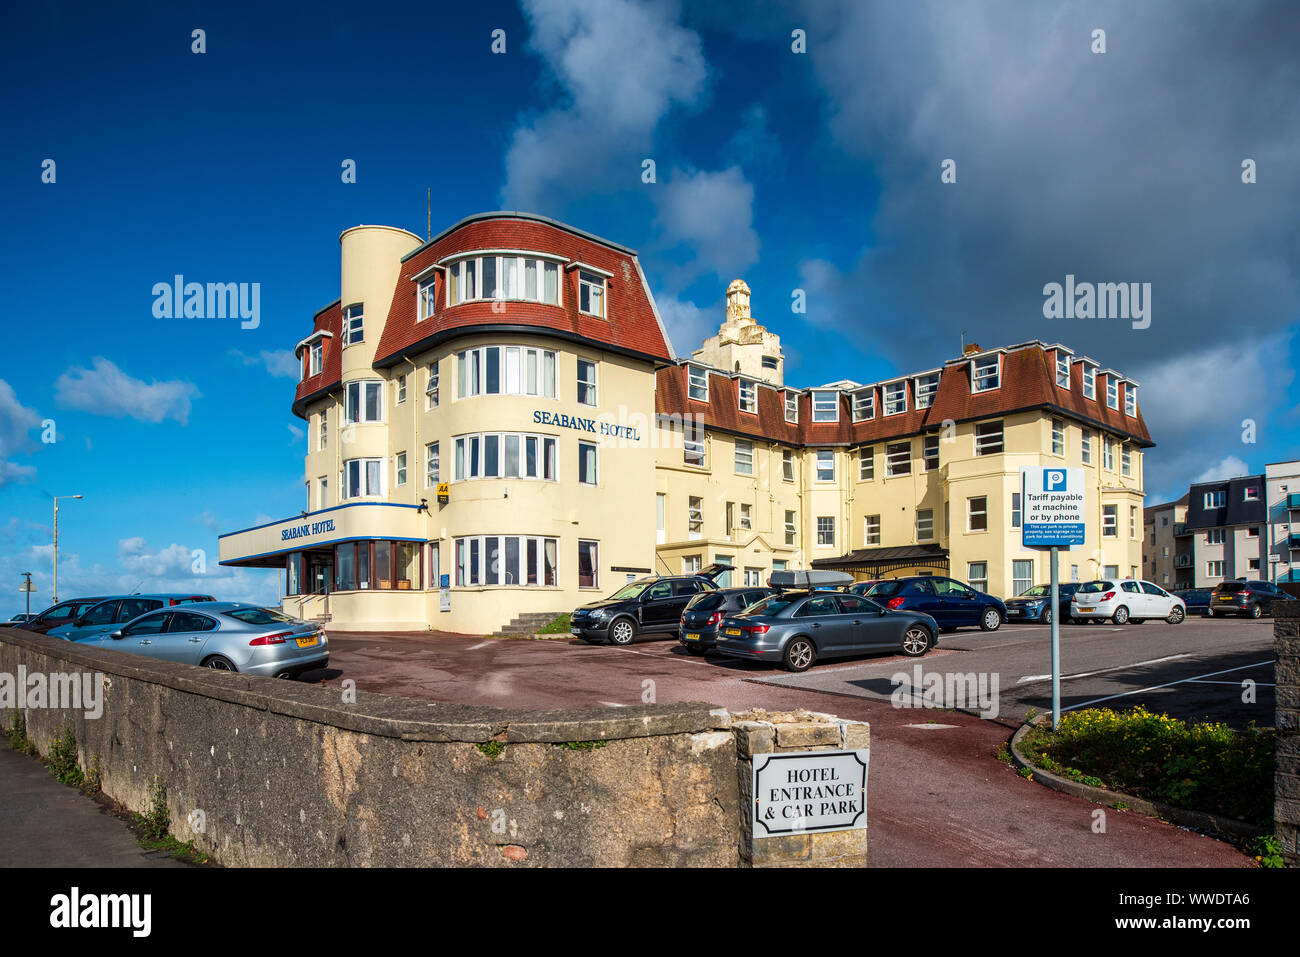 Porthcawl Seabank Hotel on the seafront in the South Wales seaside resort of Porthcawl. Opened in the 1930s as the Seabank Hydro Hotel. Stock Photo